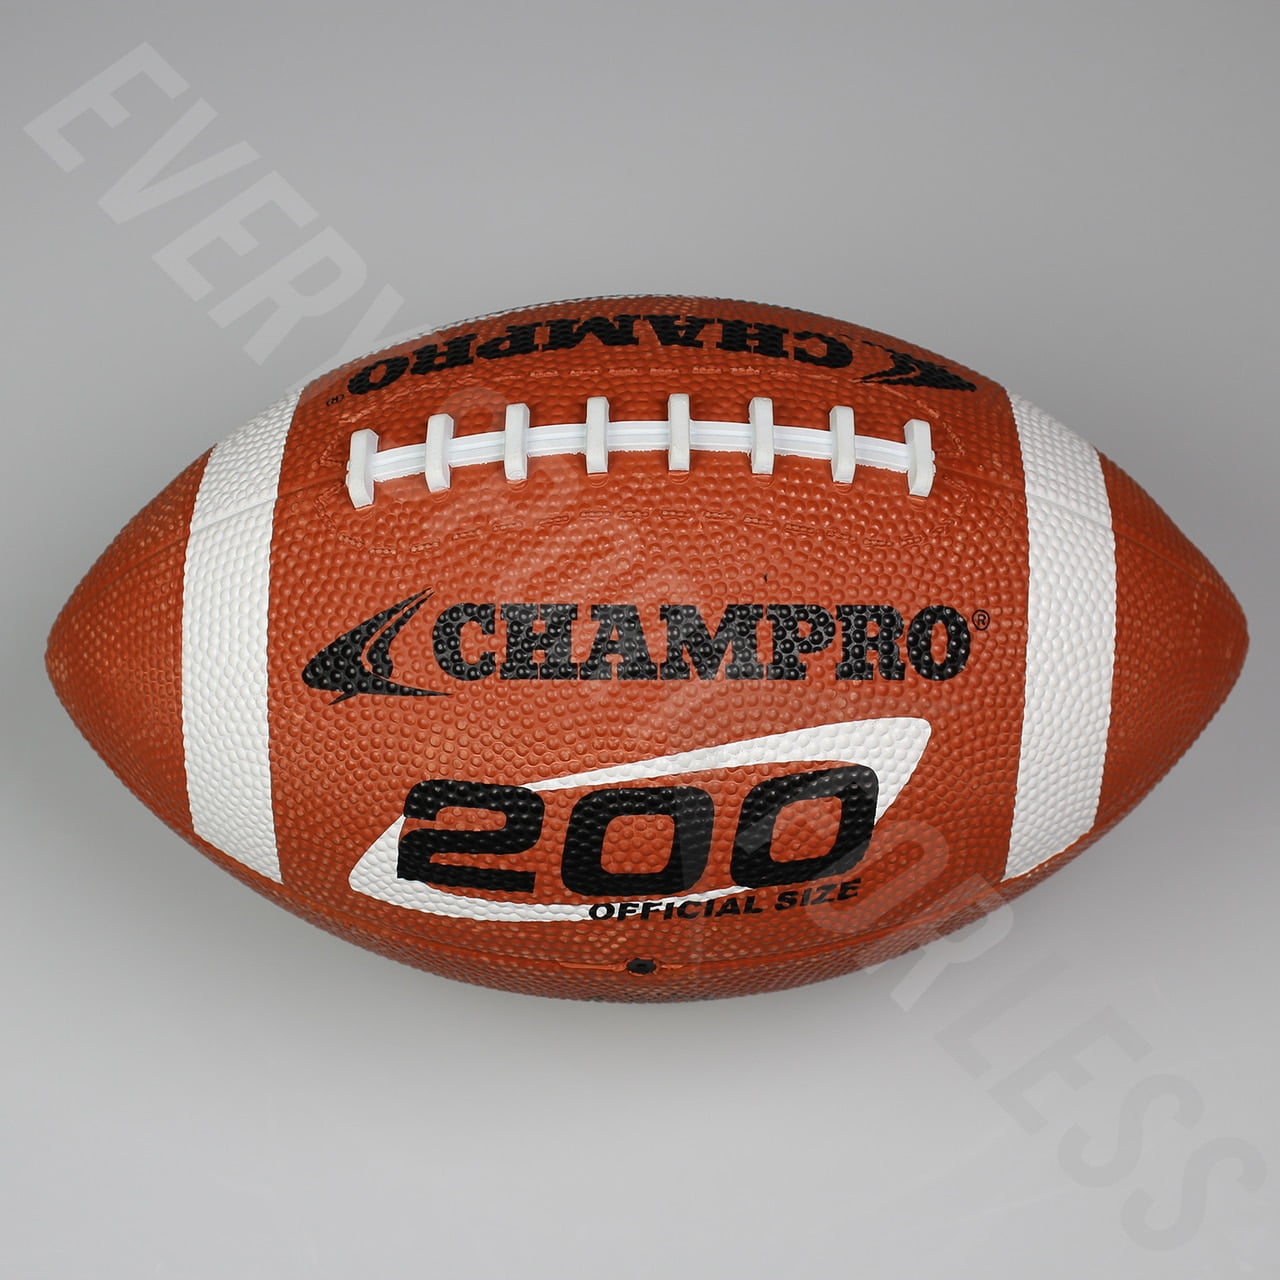 ESPN Future Pro Junior Football Age 9 to 12 Yrs All American Leather for sale online 